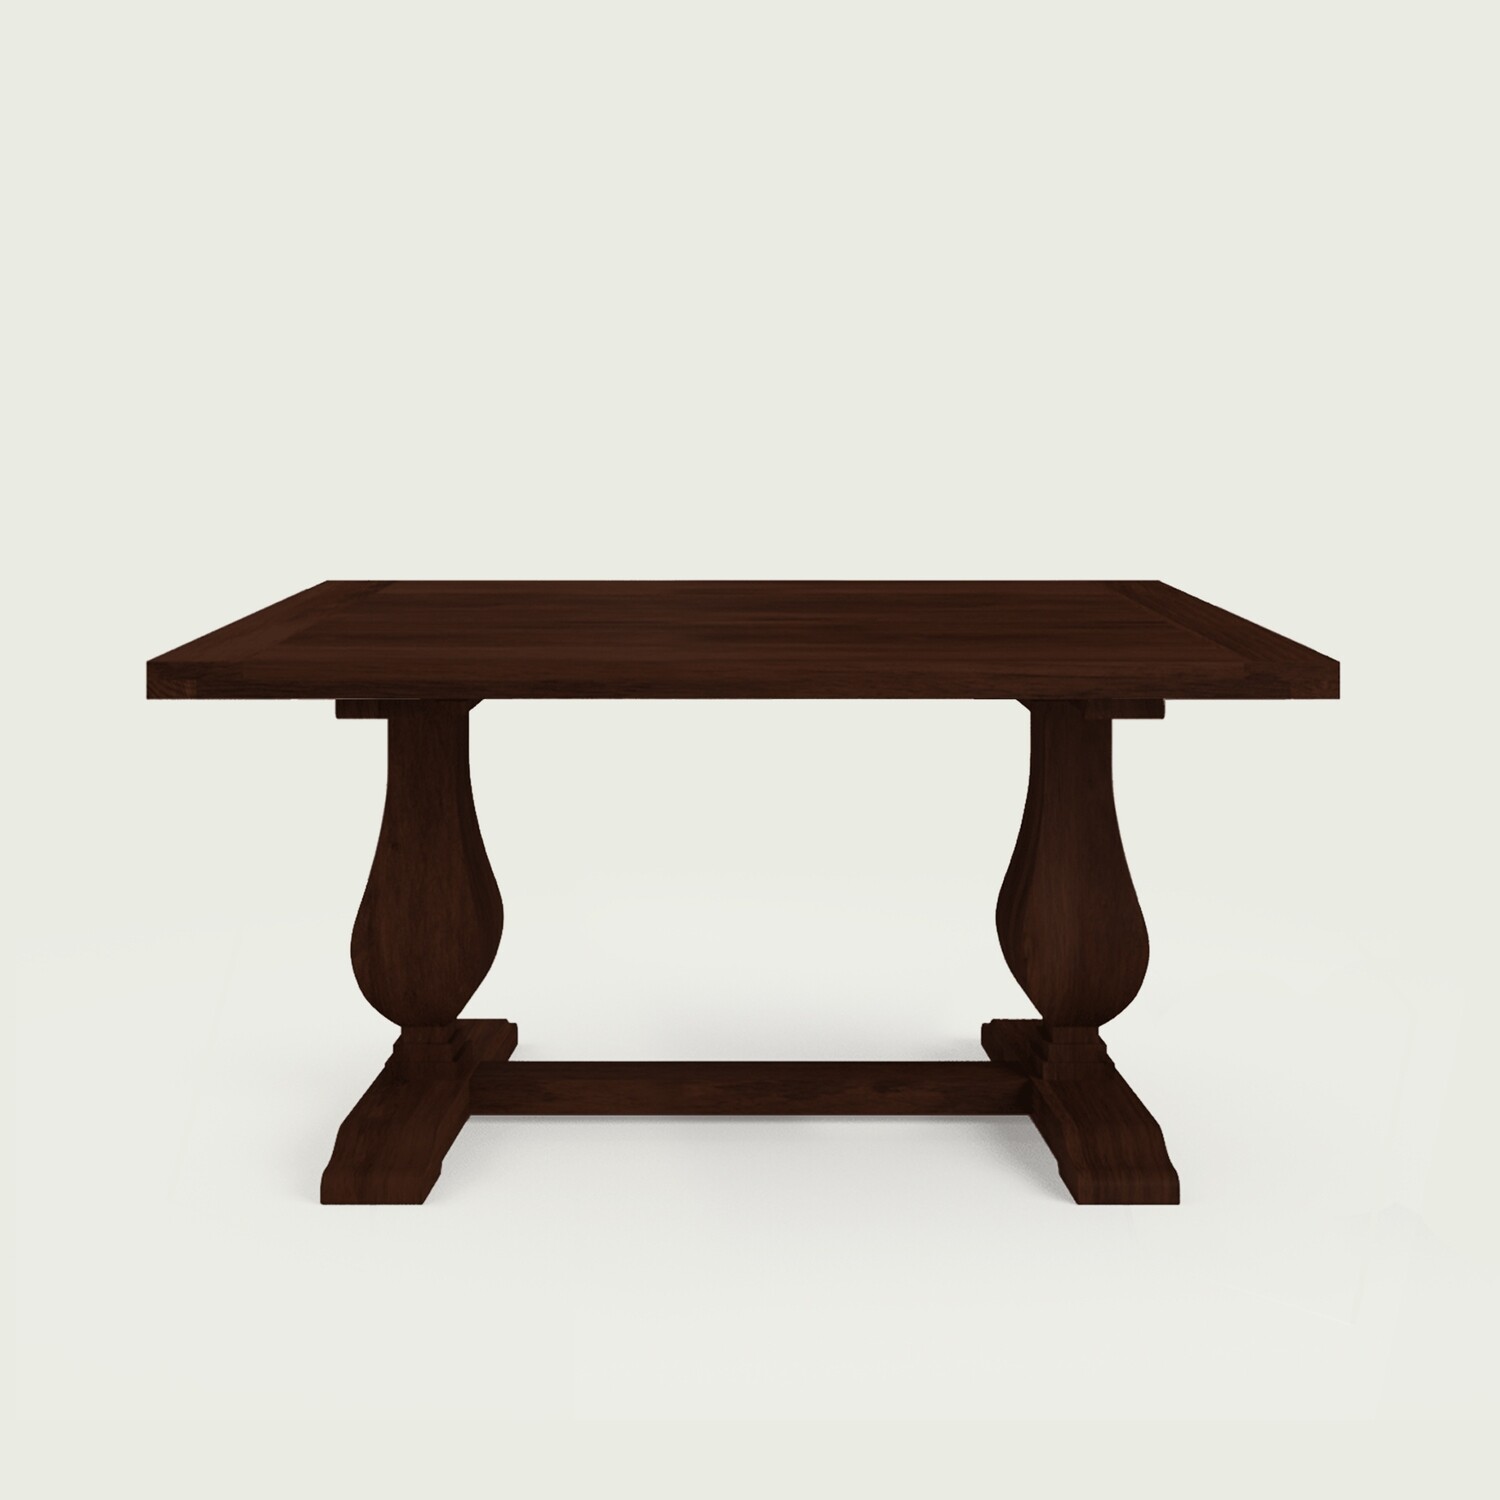 Derbyshire Luxury Dining Table - 4, 6 & 8 Seater/All Sizes